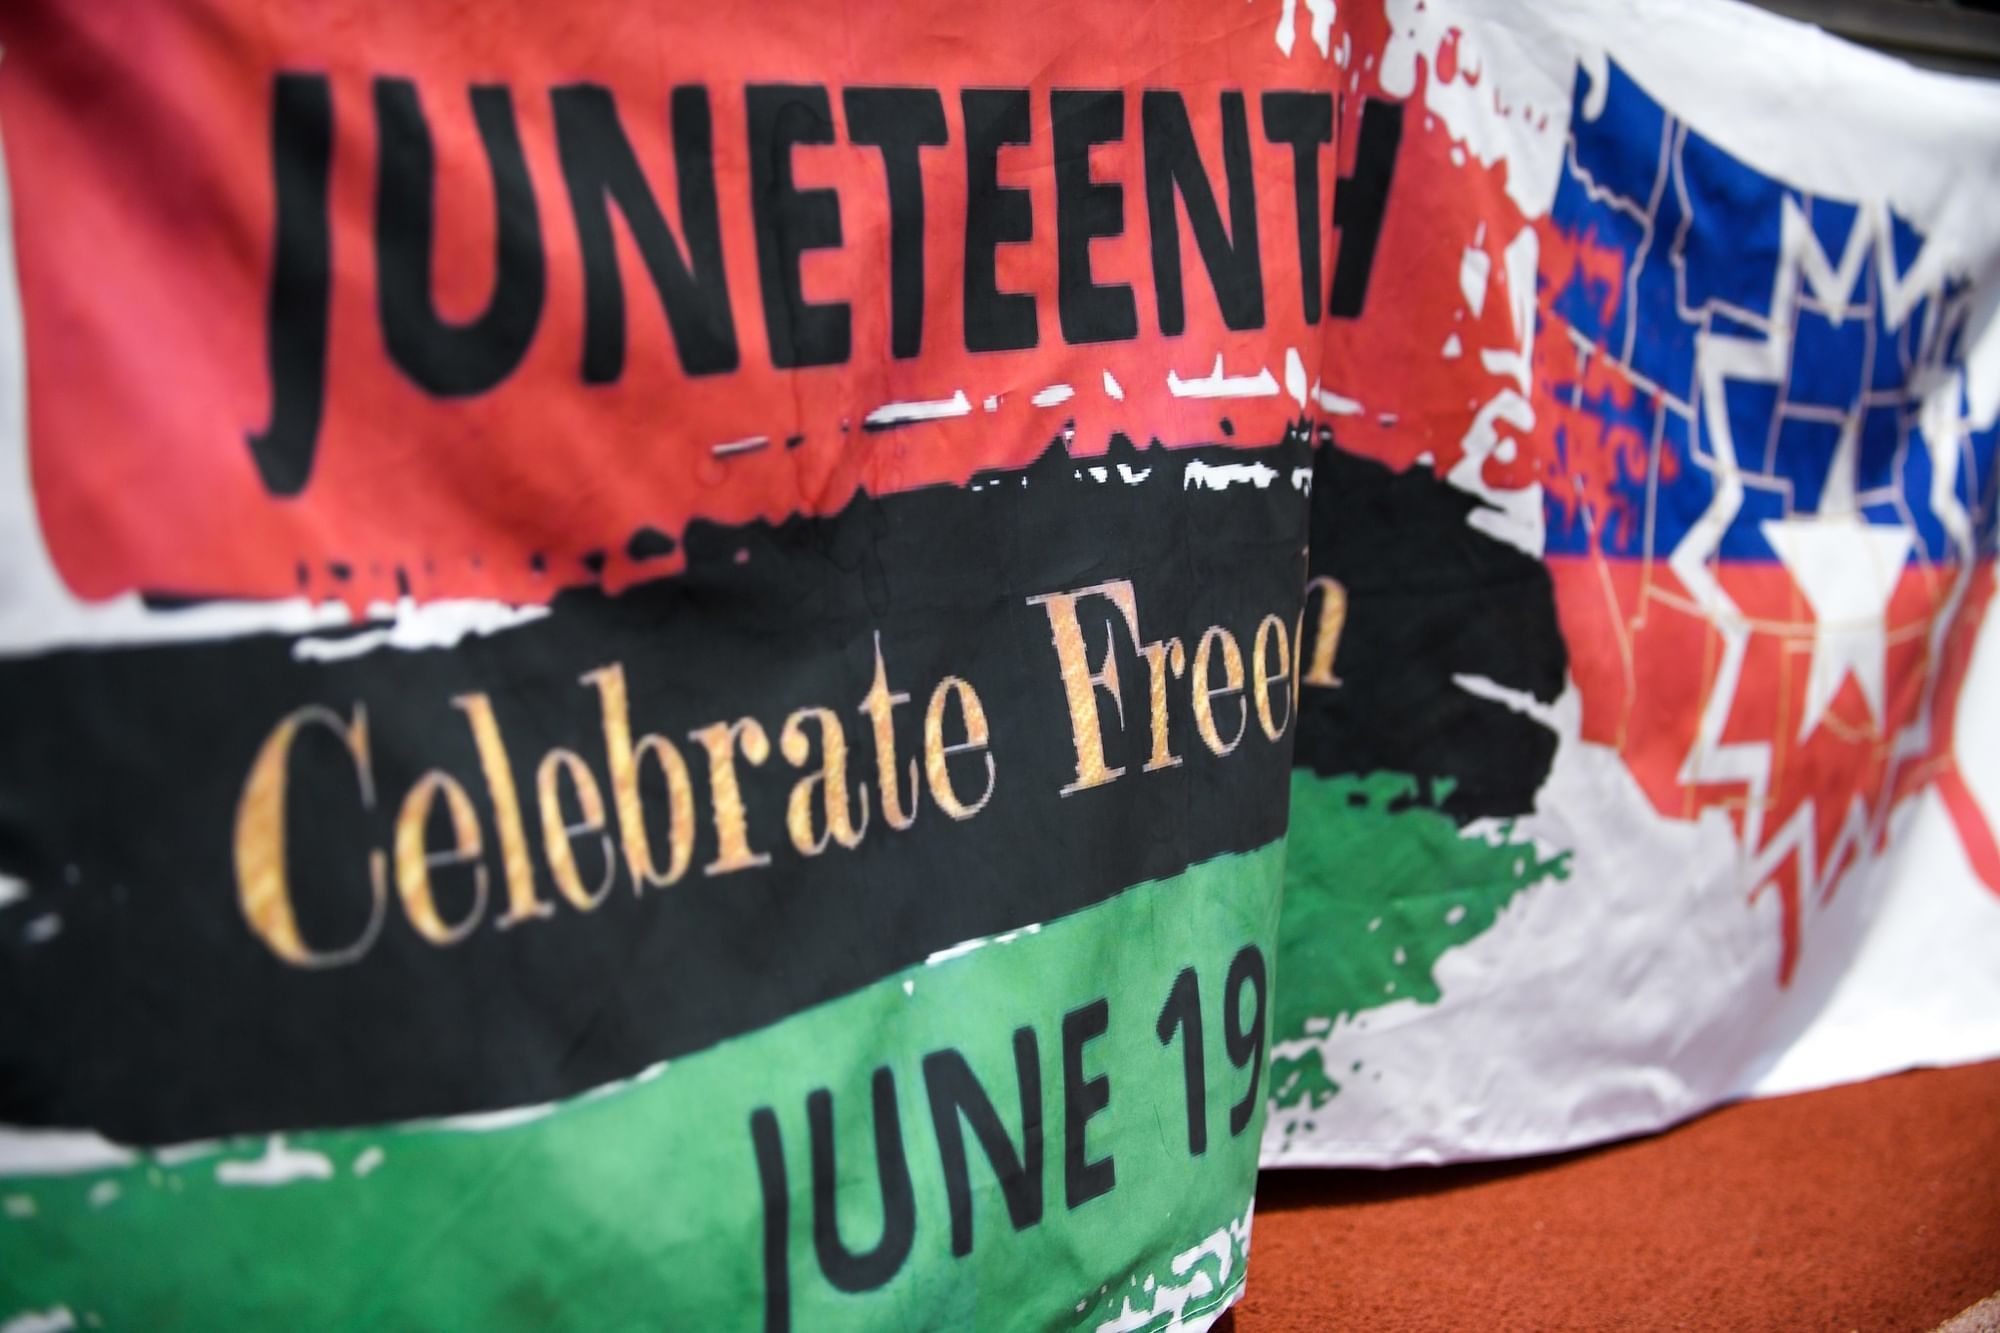 Flag with a red, black and green stripe that reads "Juneteenth," "Celebrate Freedom," and "June 19."